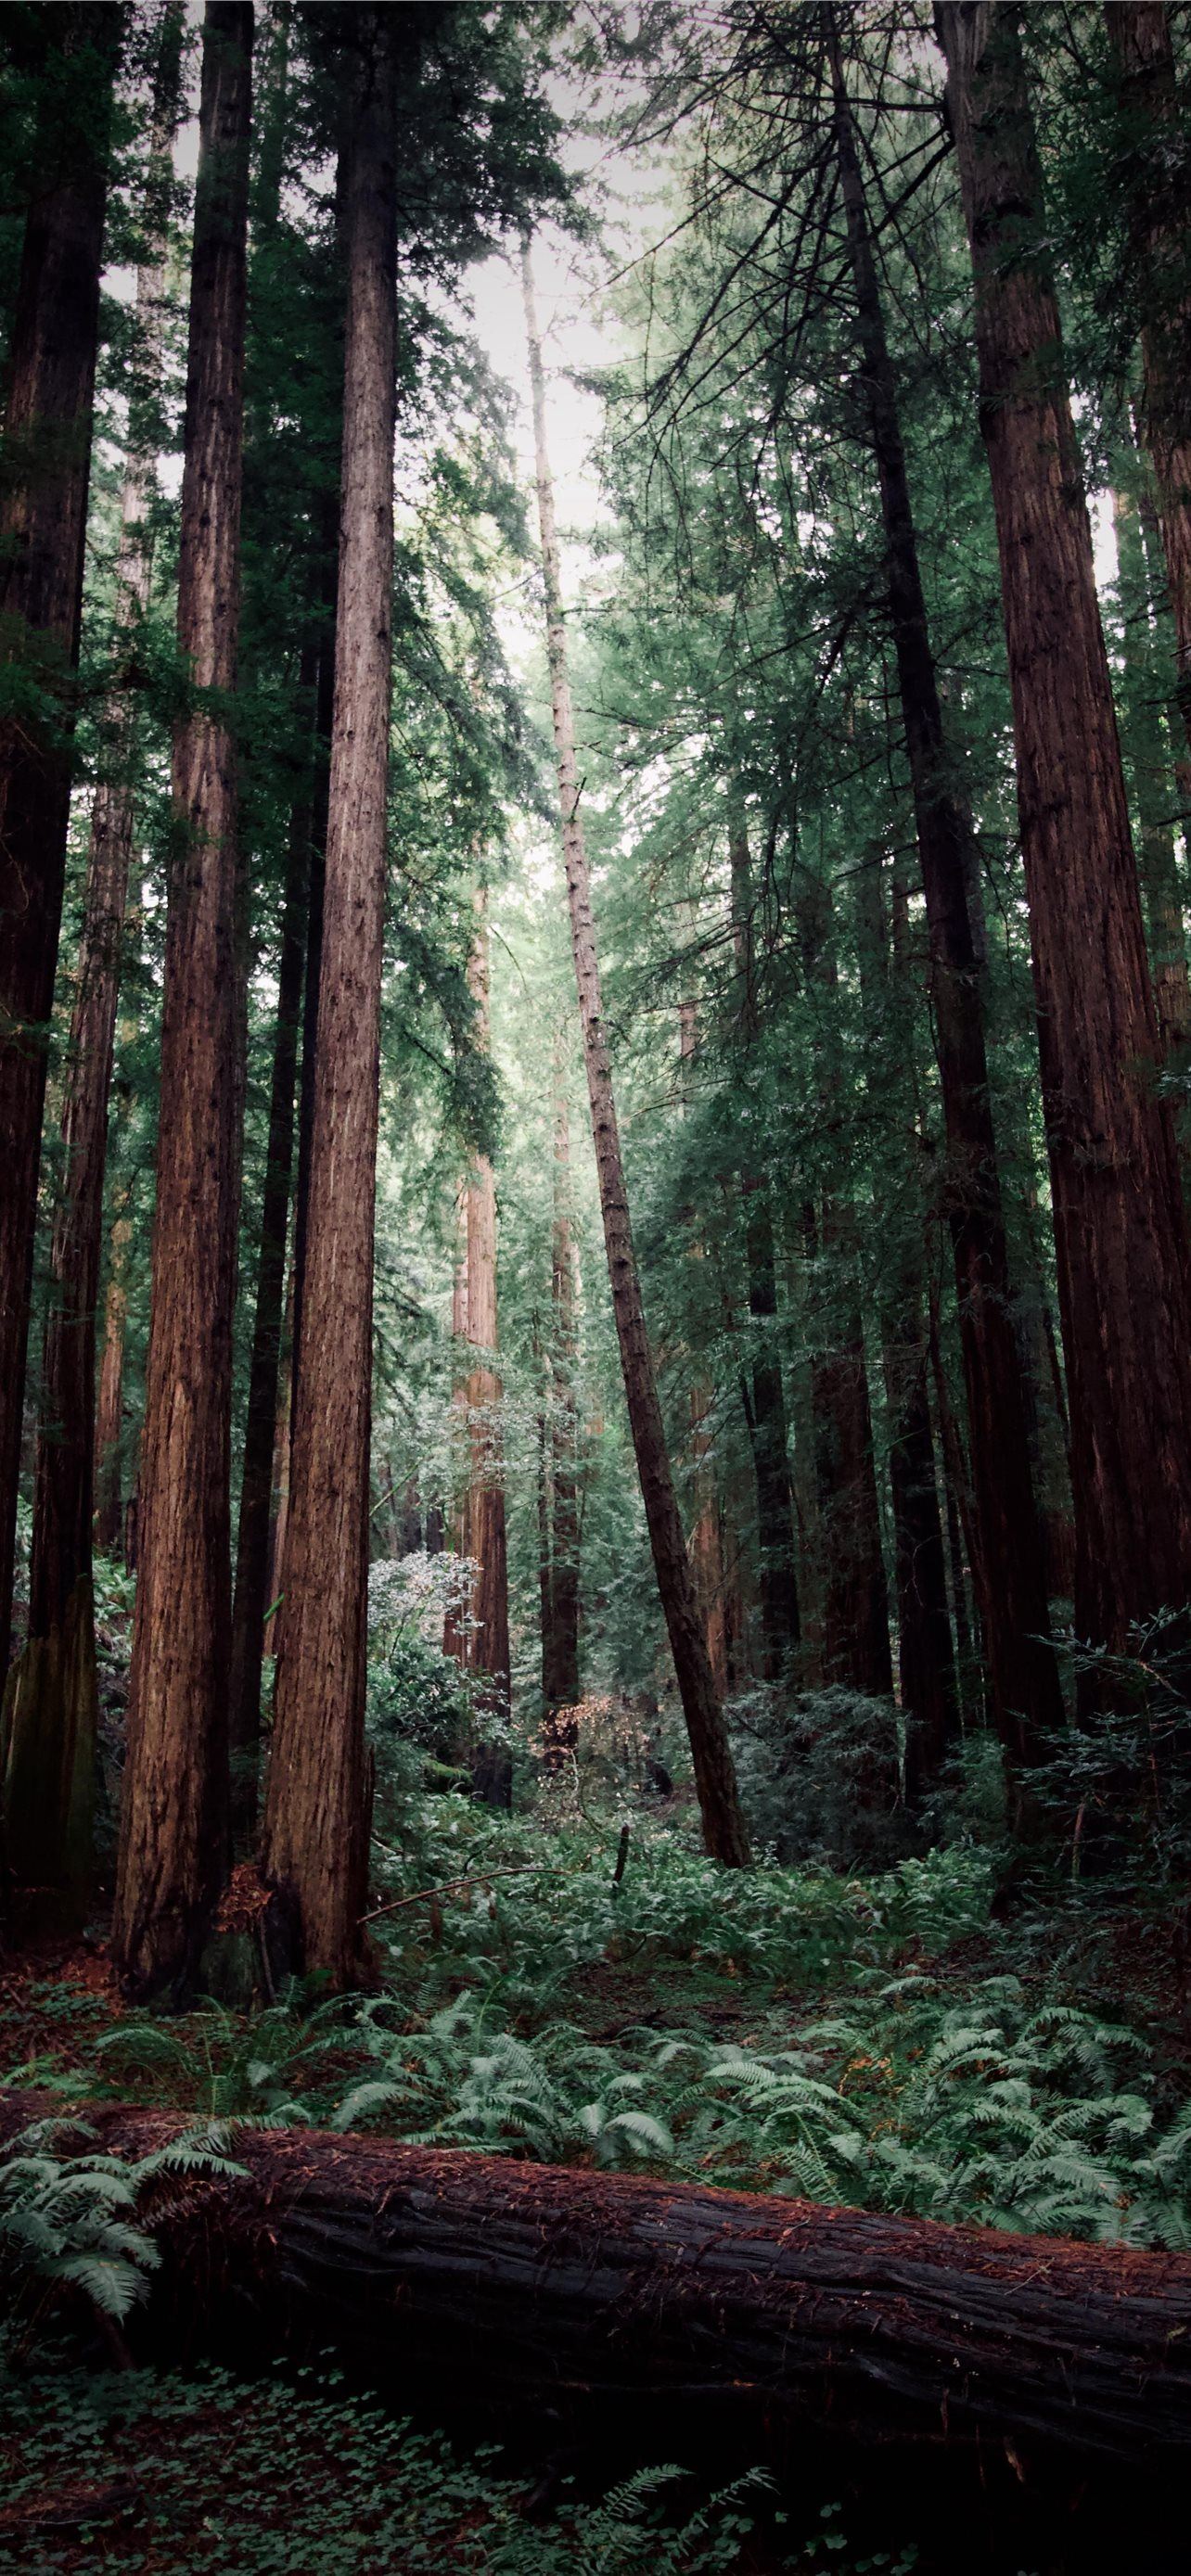 muir woods national monument iPhone Wallpaper Free Download